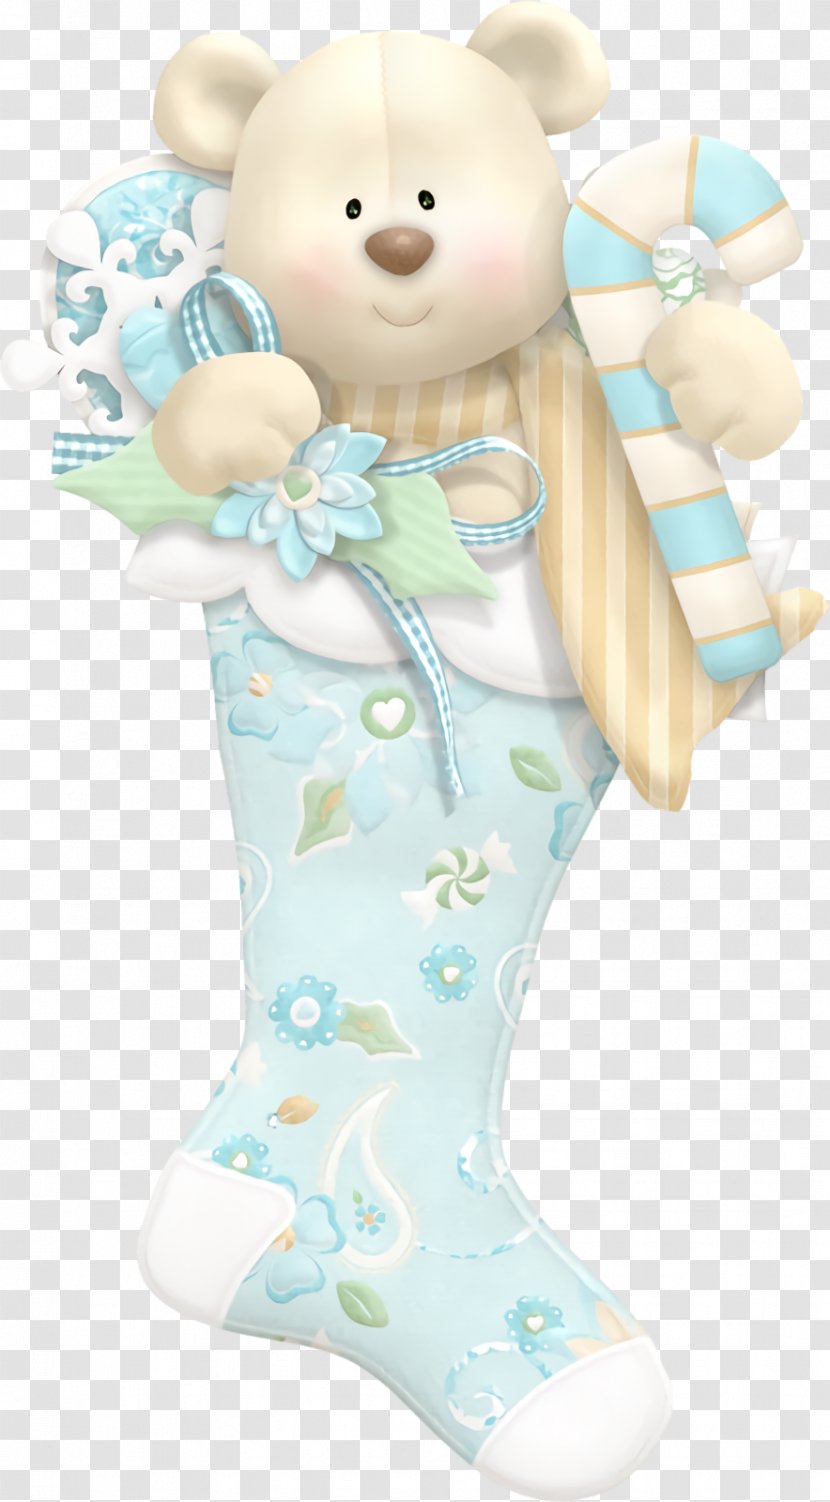 Christmas Stocking Socks - Toy Transparent PNG